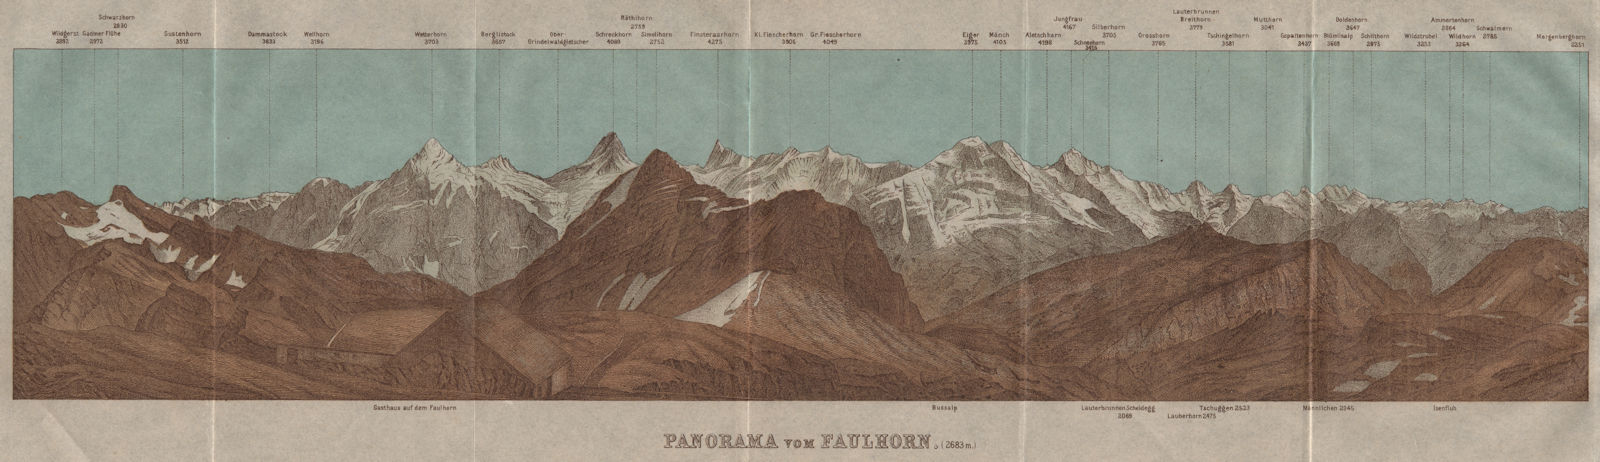 Associate Product PANORAMA from/vom FAULHORN. Berner Oberland. Bernese Oberland 1911 old map